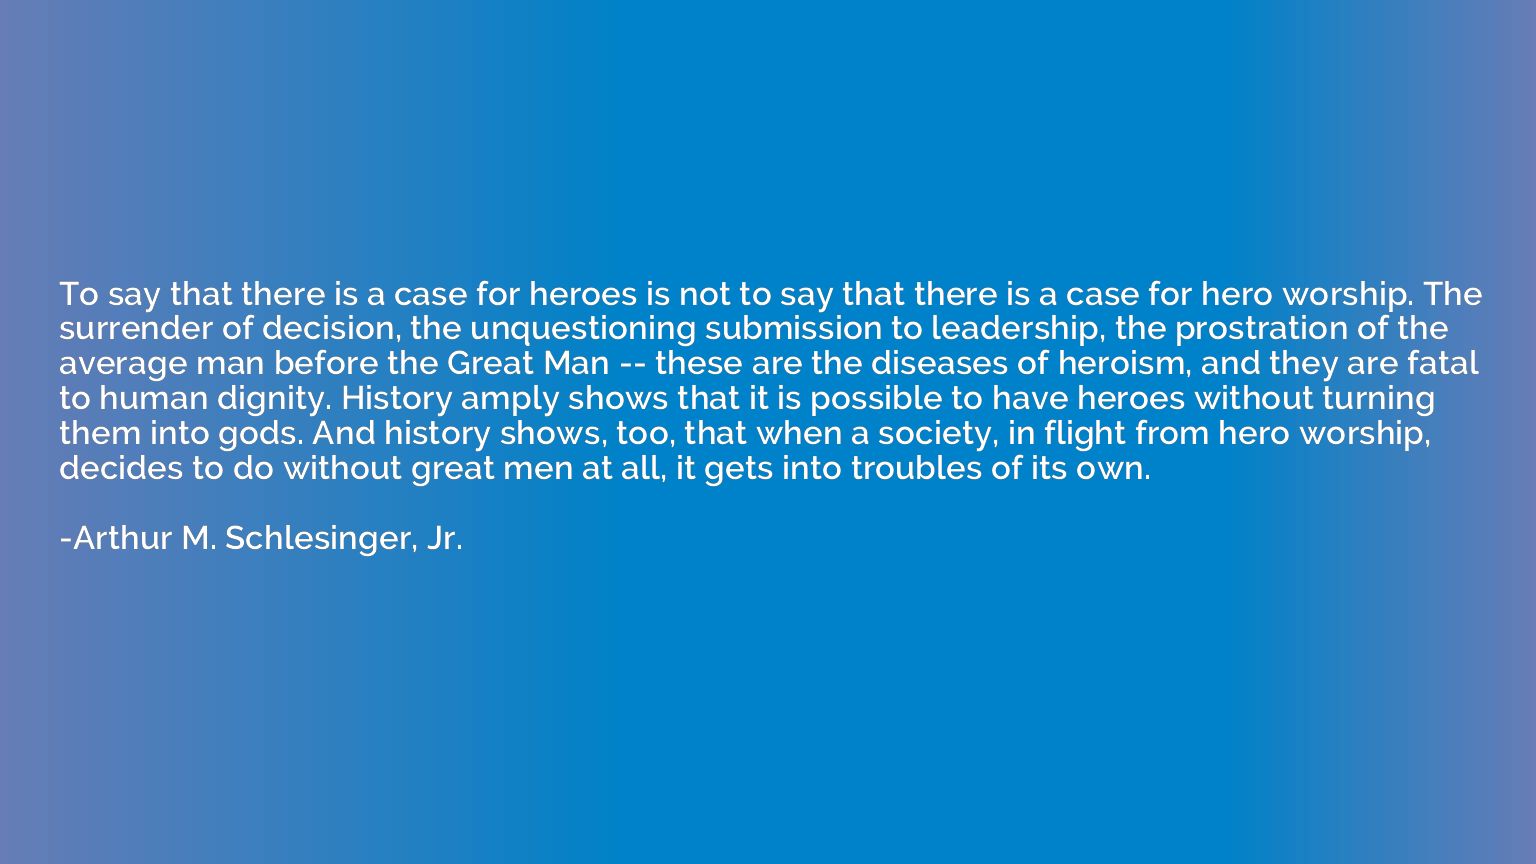 To say that there is a case for heroes is not to say that th